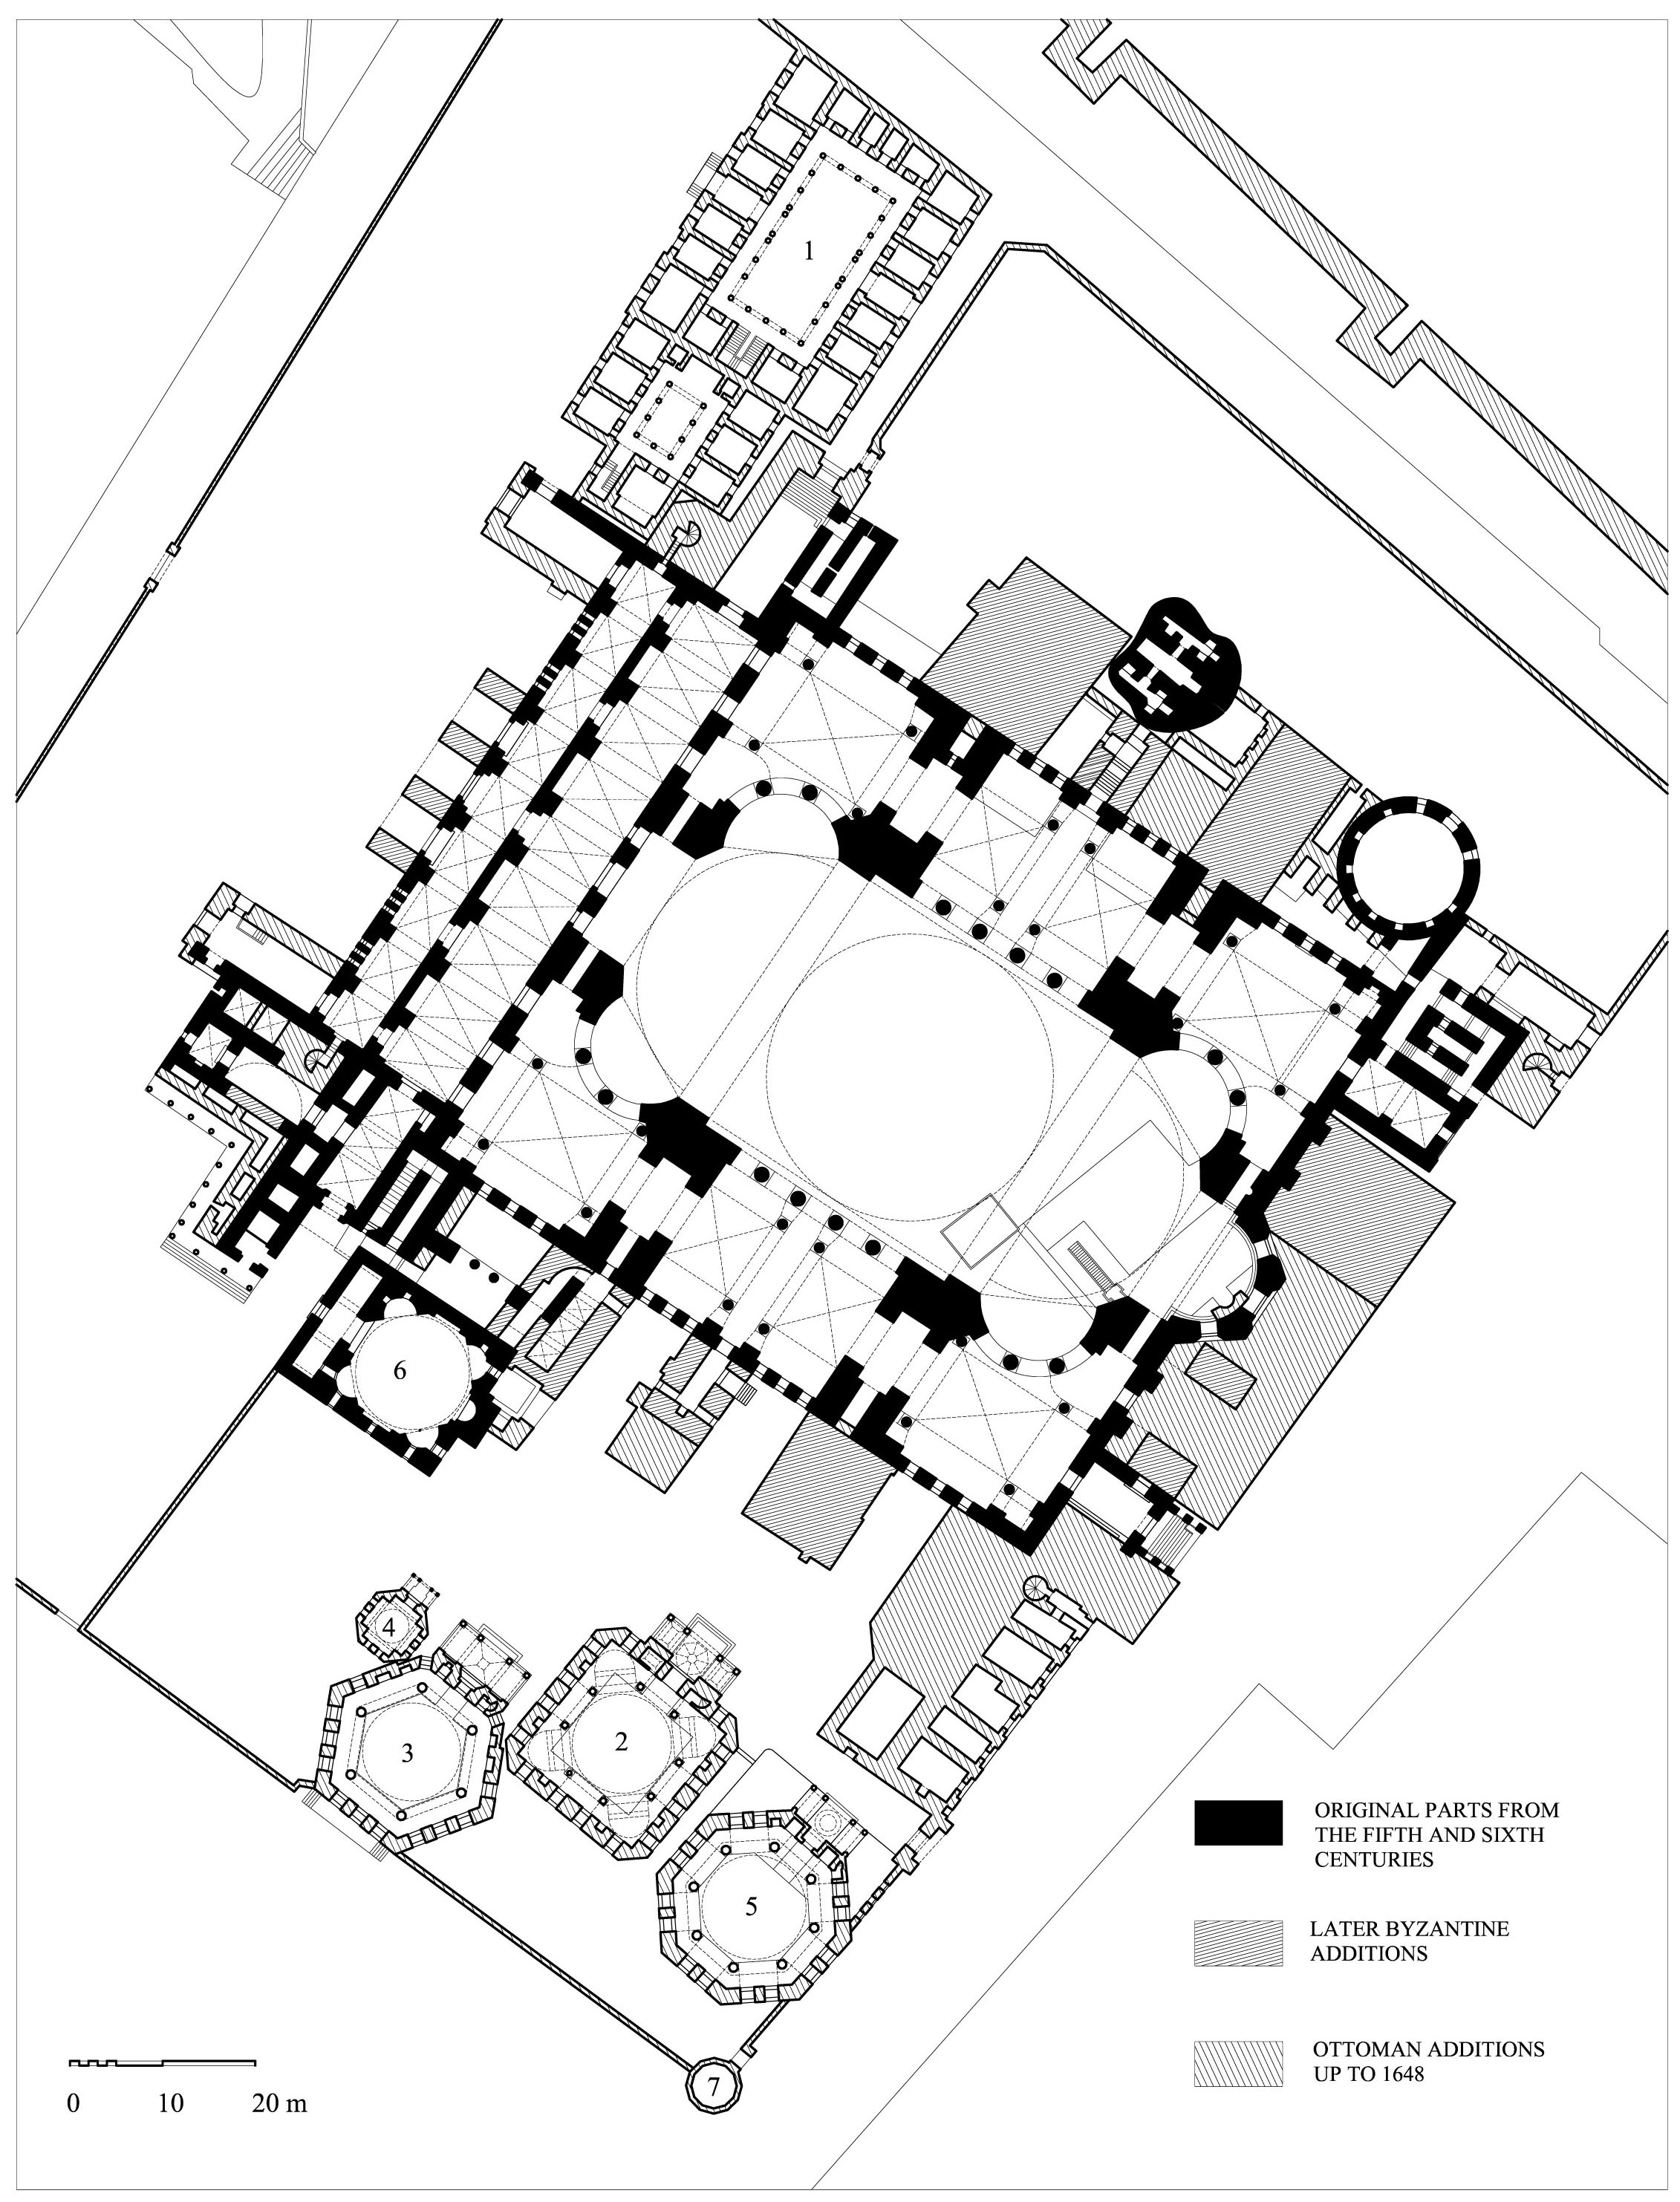 Hagia Sophia - Floor plan of Hagia Sophia in the seventeenth century, showing (1) madrasa (1453-81), (2) mausoleum of Selim II (1576-77), (3) mausoleum of Murad III (1599-1600), (4) undated mausoleum of princes, (5) mausoleum of Mehmed III (1608-9), (6) baptistery, (7) domed sabil. DWG file in AutoCAD 2000 format. Click the download button to download a zipped file containing the .dwg file.